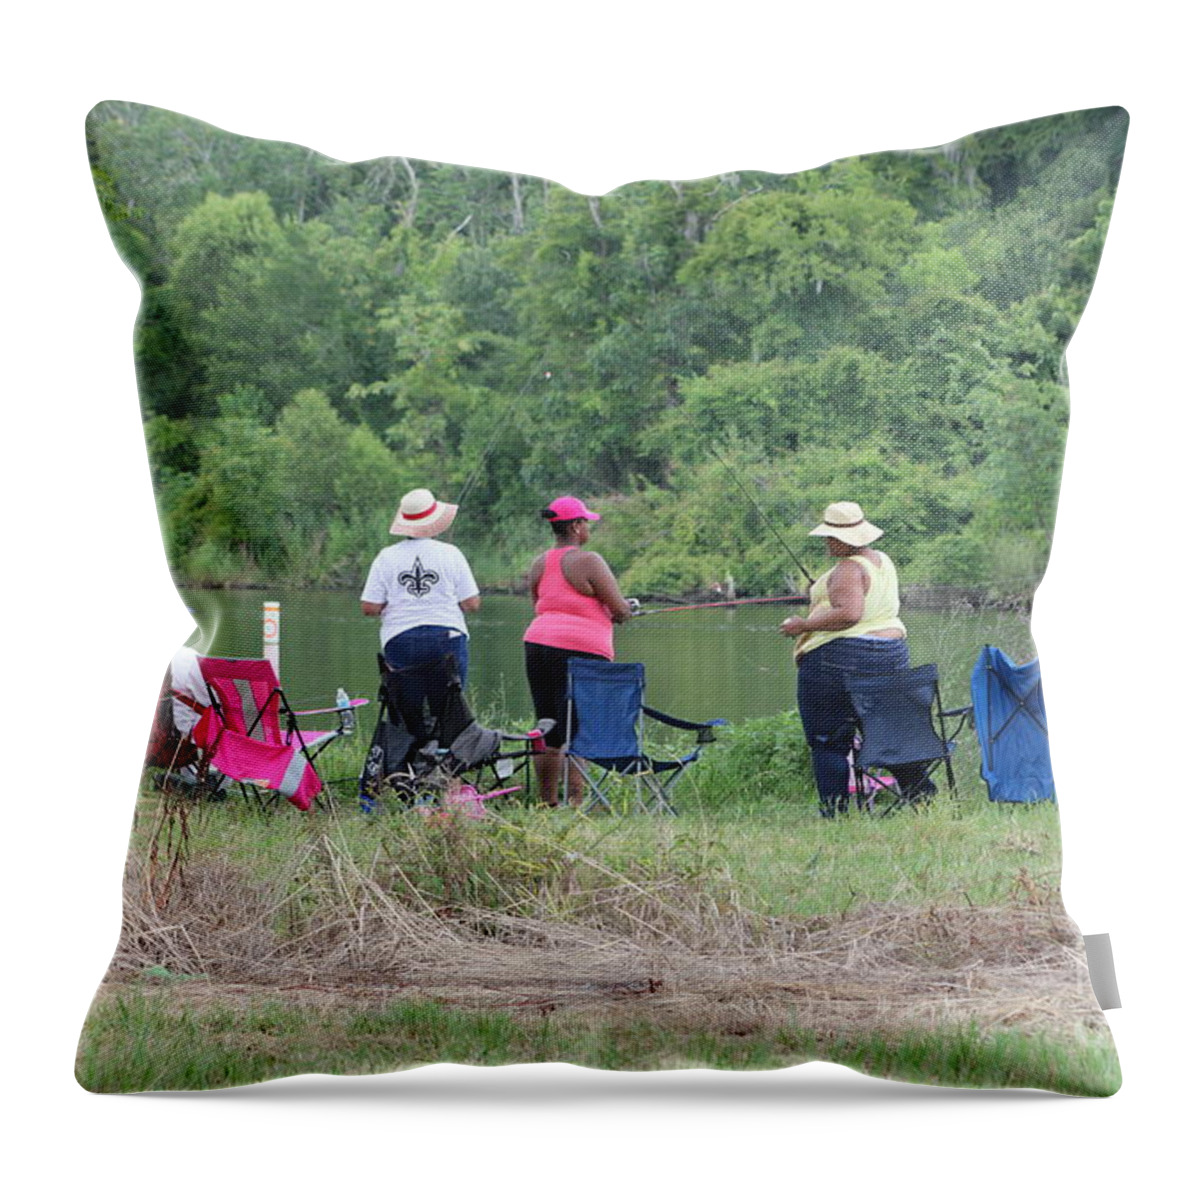 Lake Throw Pillow featuring the photograph Bonnie Carrie Spillway Fishing 2 by Michelle Powell